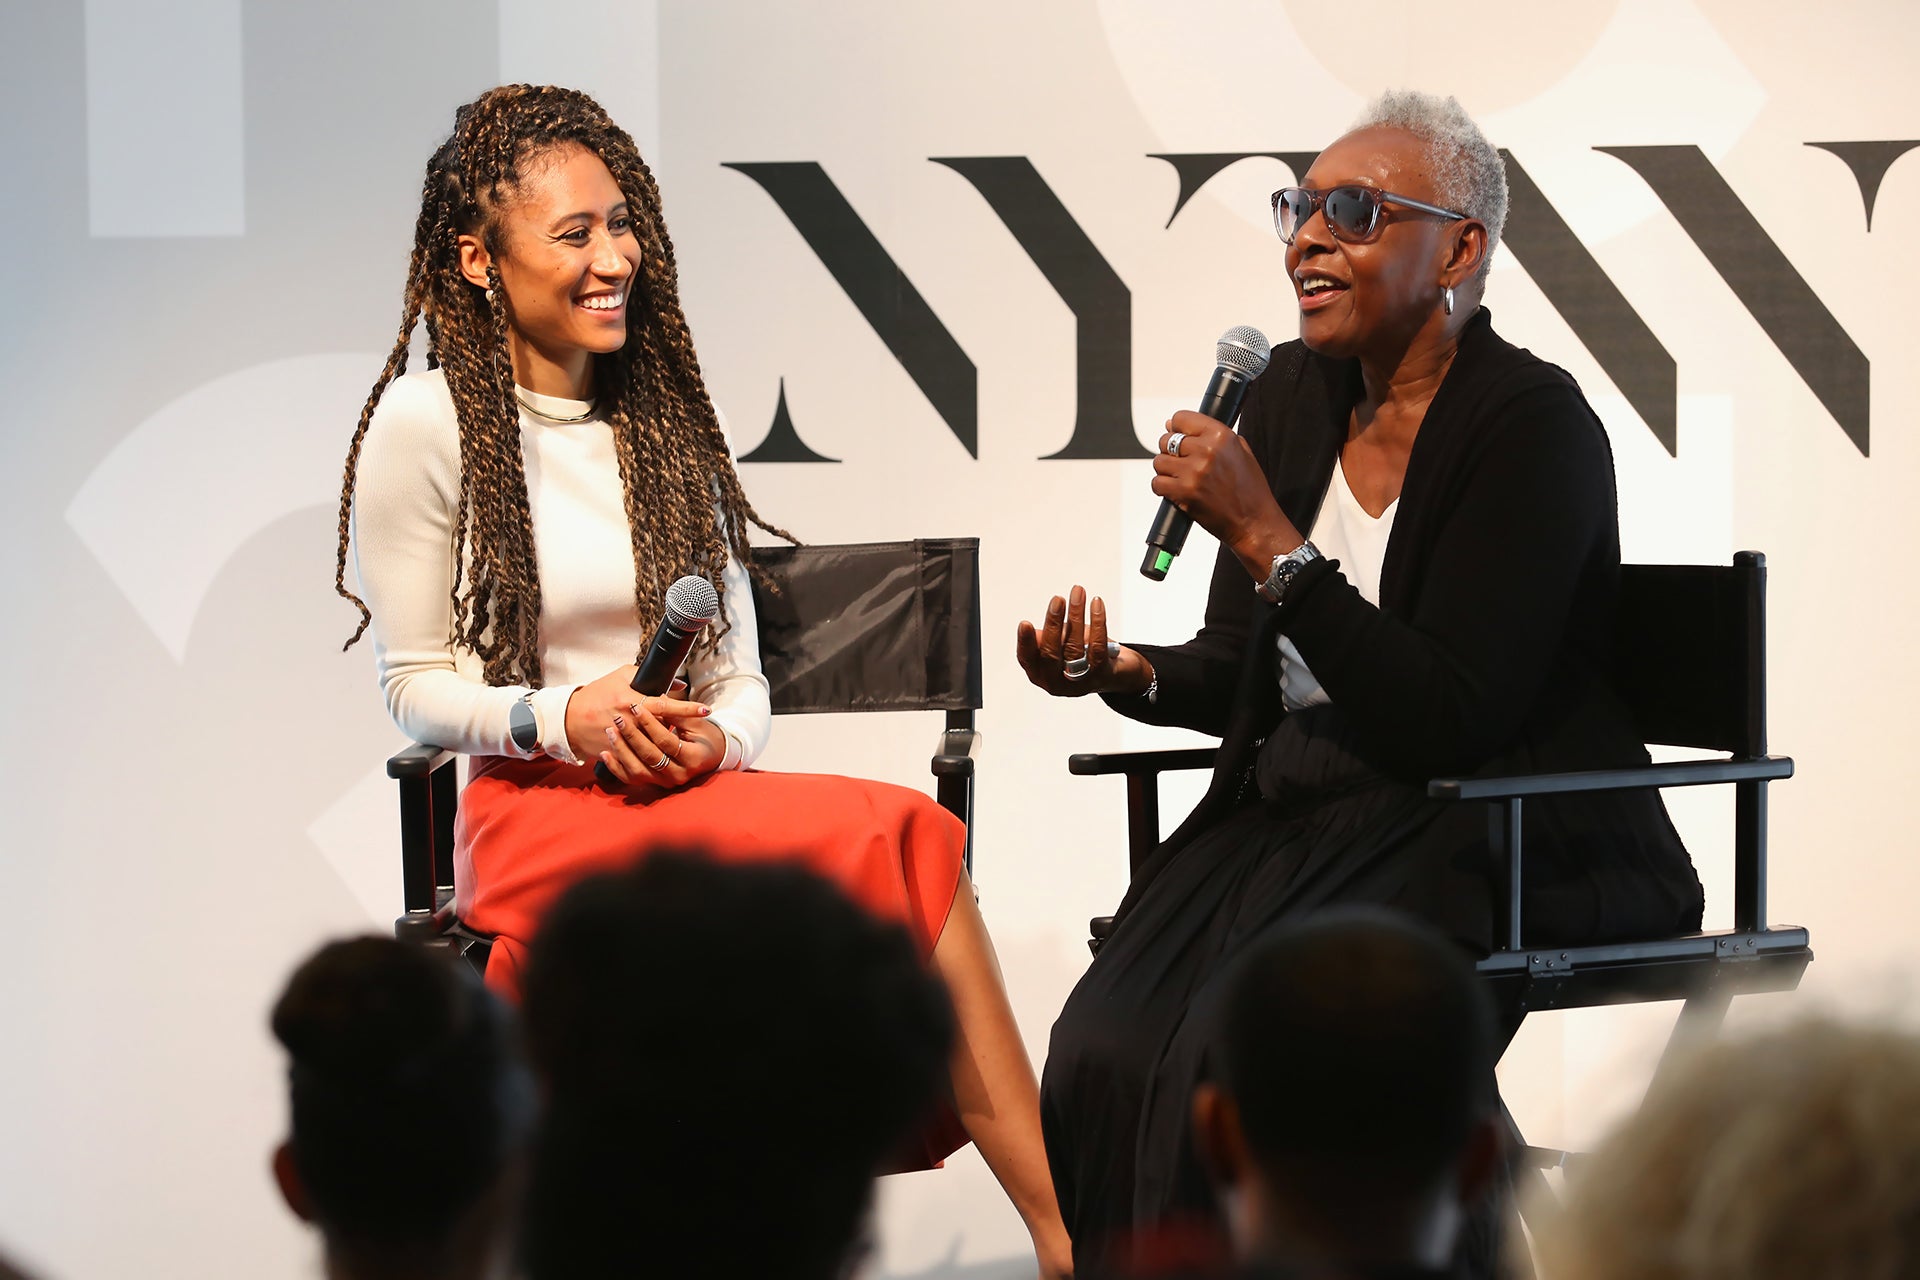 Bethann Hardison Continues Her Mission To Make Fashion More Diverse